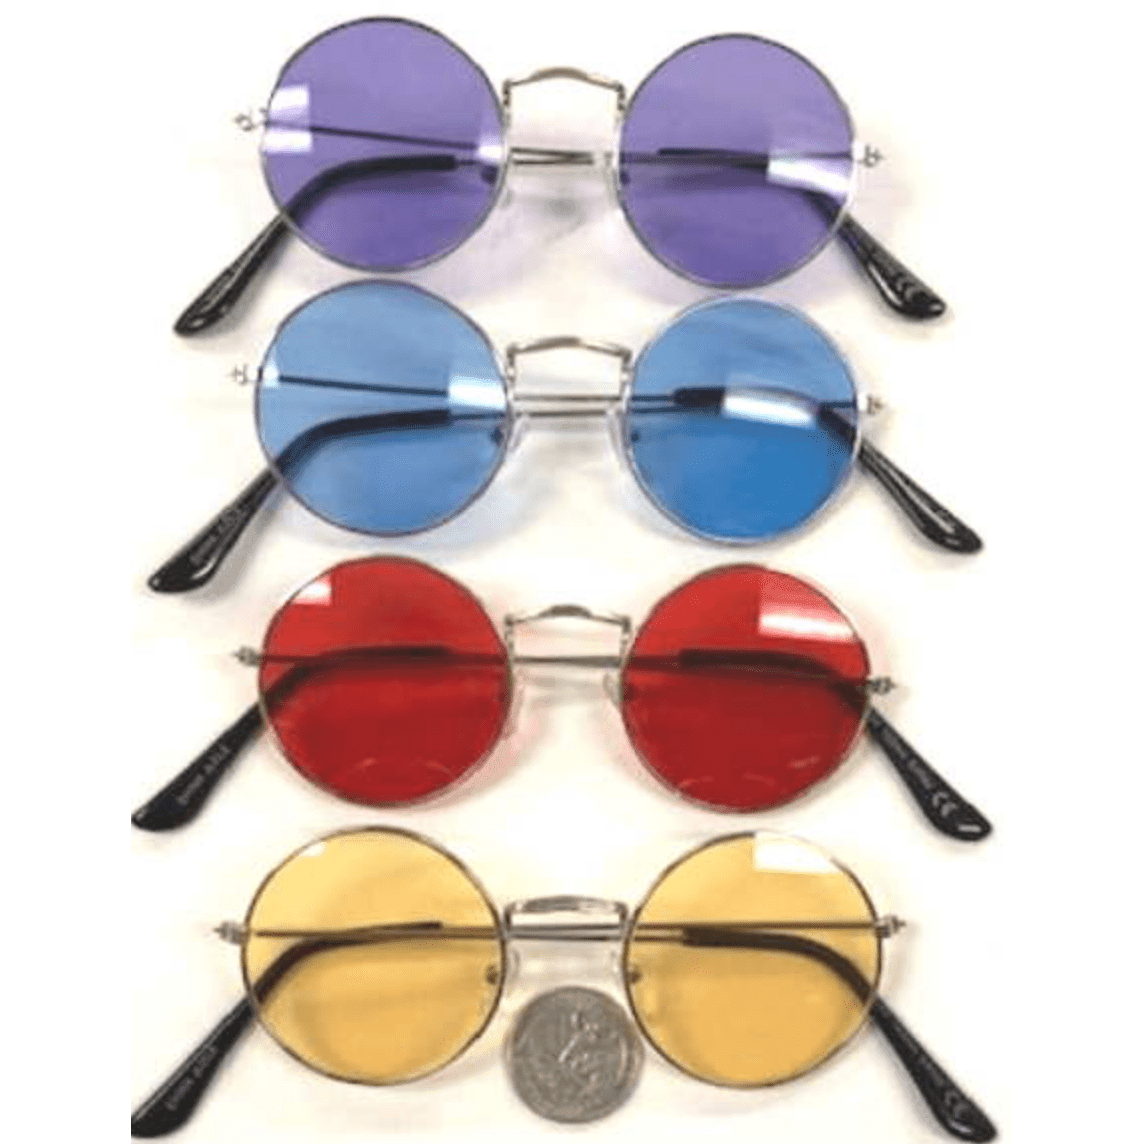 Lennon Sunglasses In Assorted Colors, Silver Frames